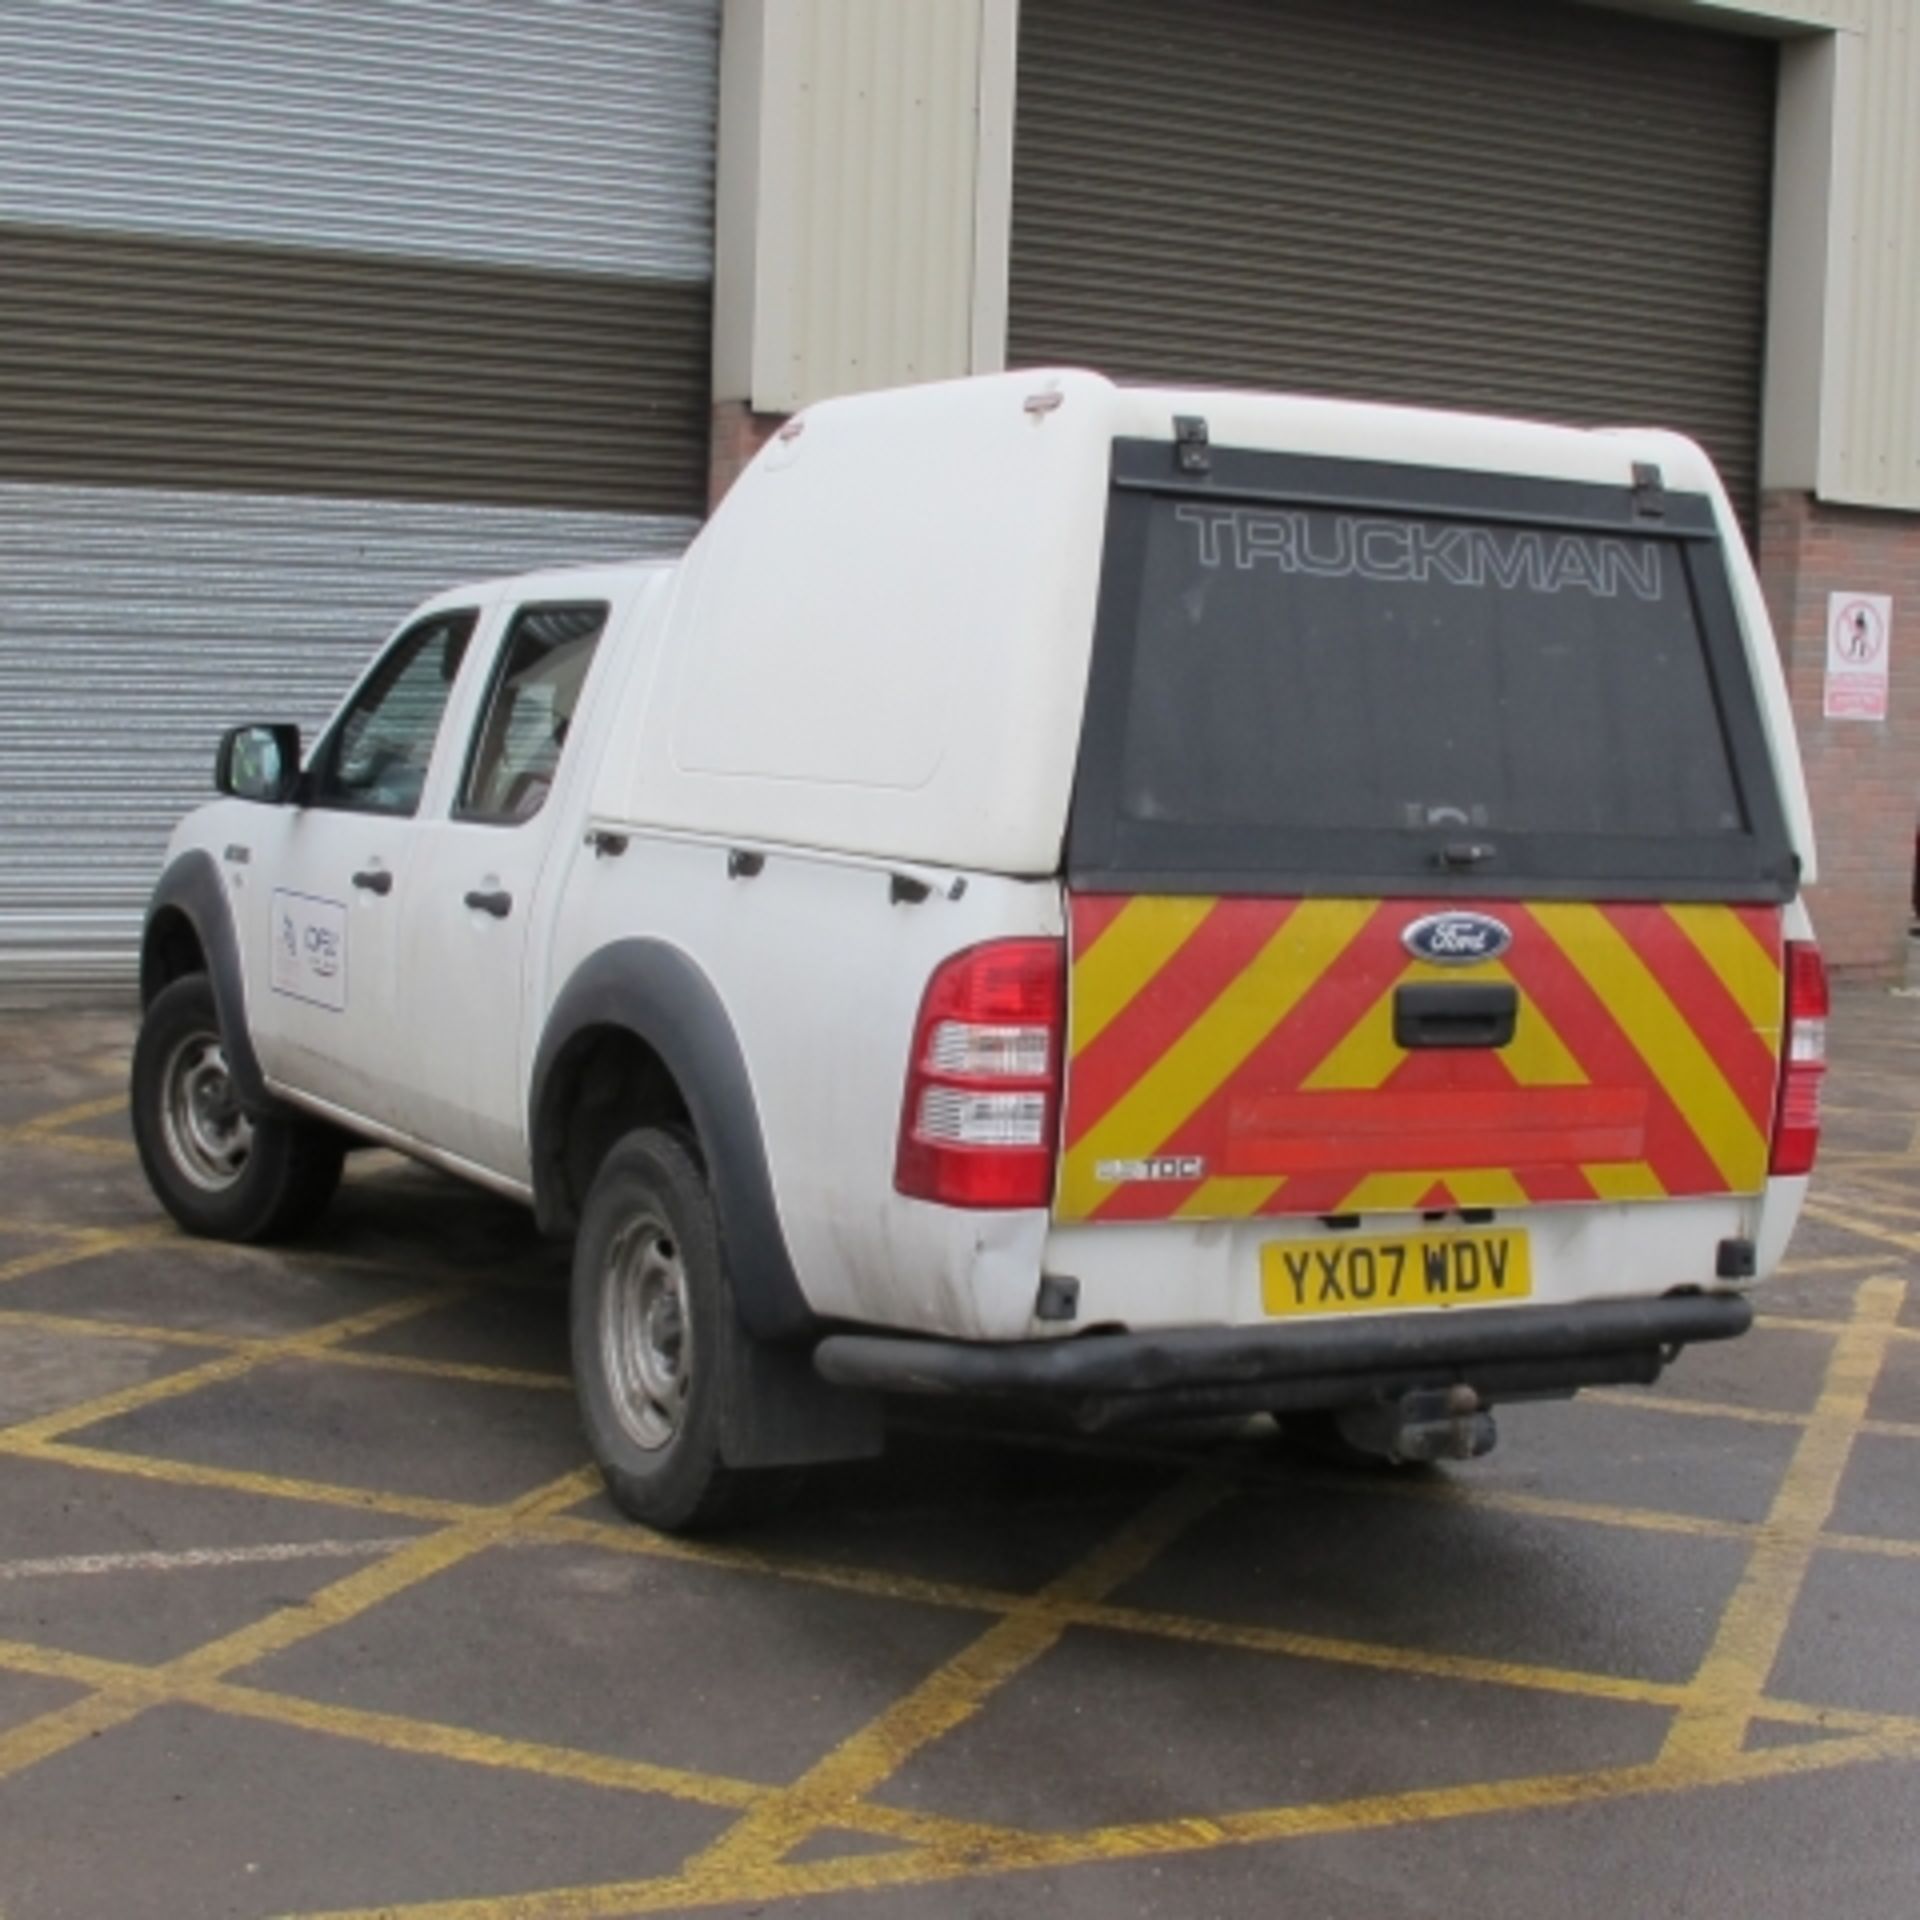 * Ford Ranger 2.5TDCI 4WD Crew Cab Pick Up with Rear Canopy & Ball Hitch, Reg YX07 WDV, - Image 2 of 9